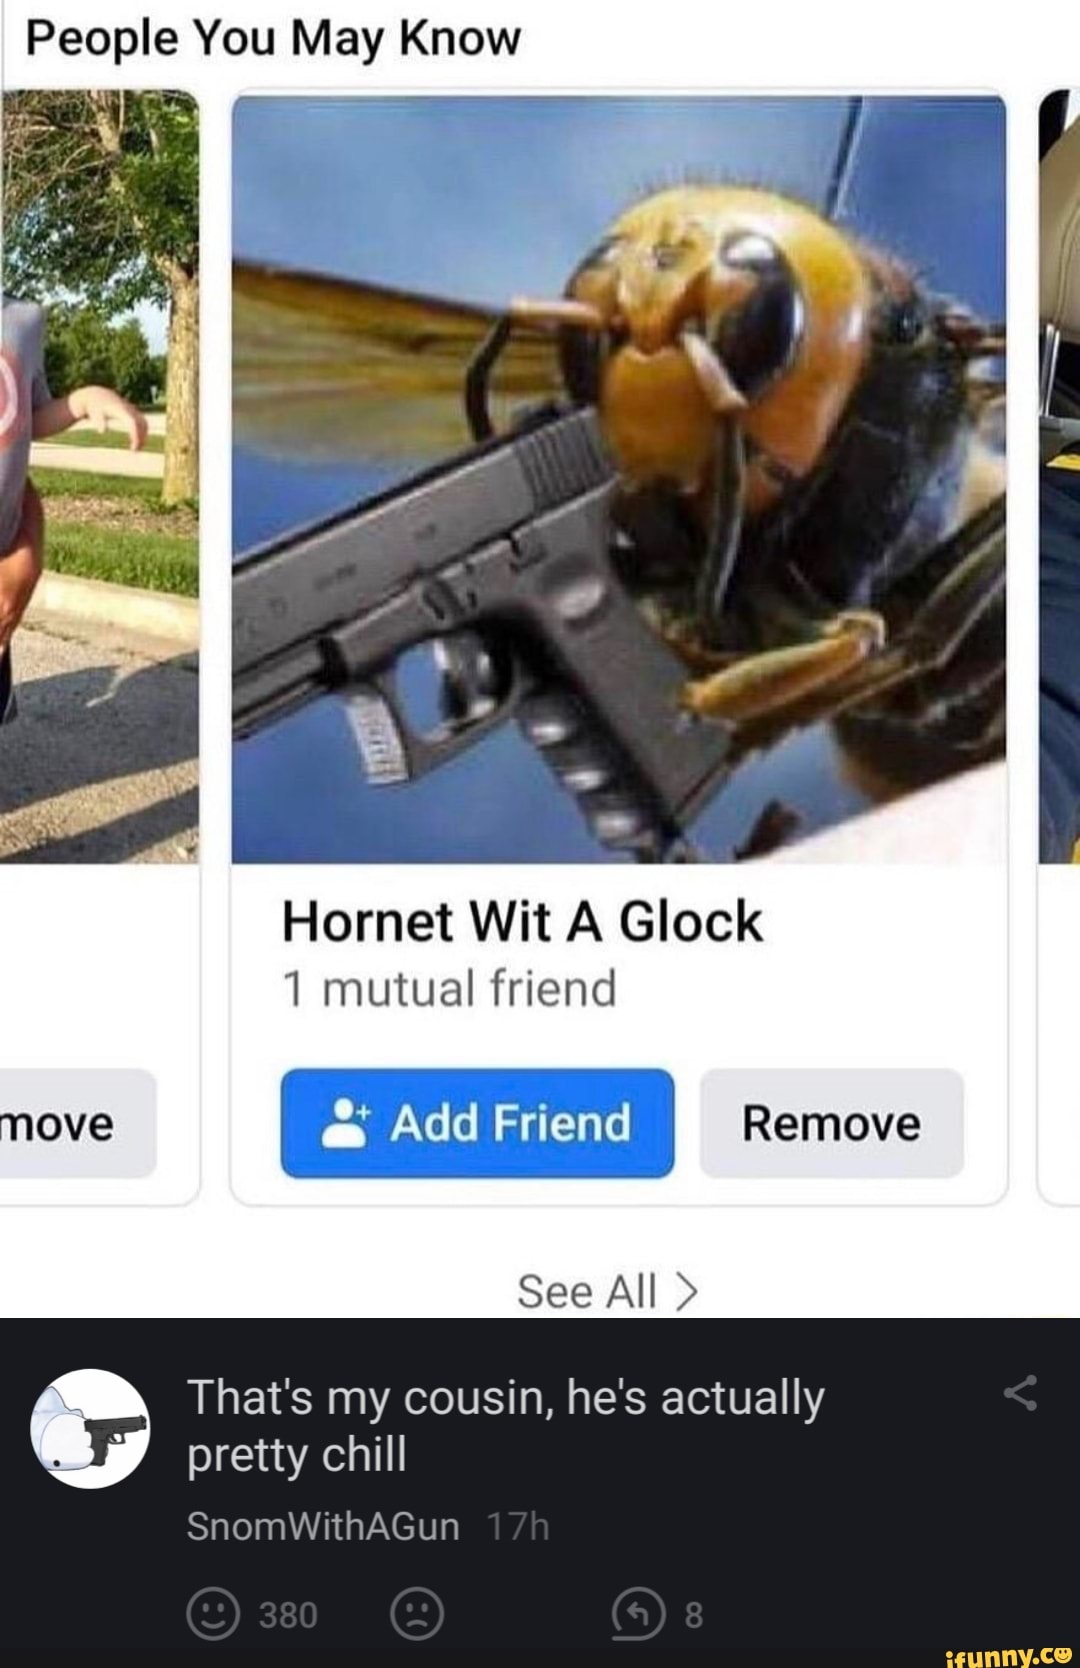 Show me a picture of a hornet